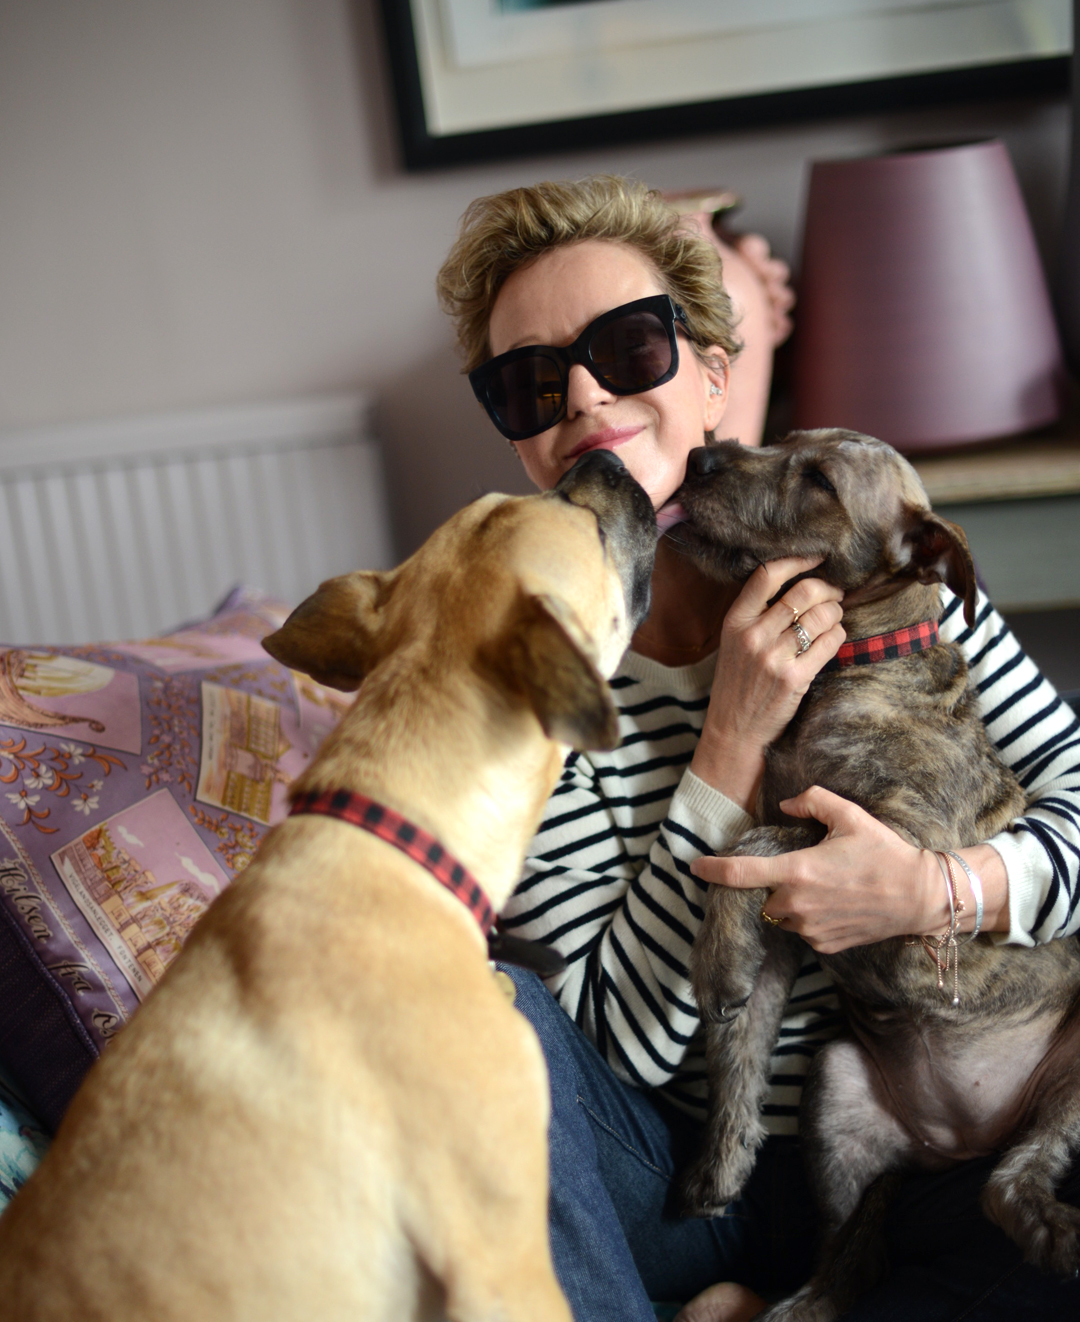 wild at heart foundation co-founder nikki tibbles at home in notting hill photographed by stylist and fashion blogger sara delaney